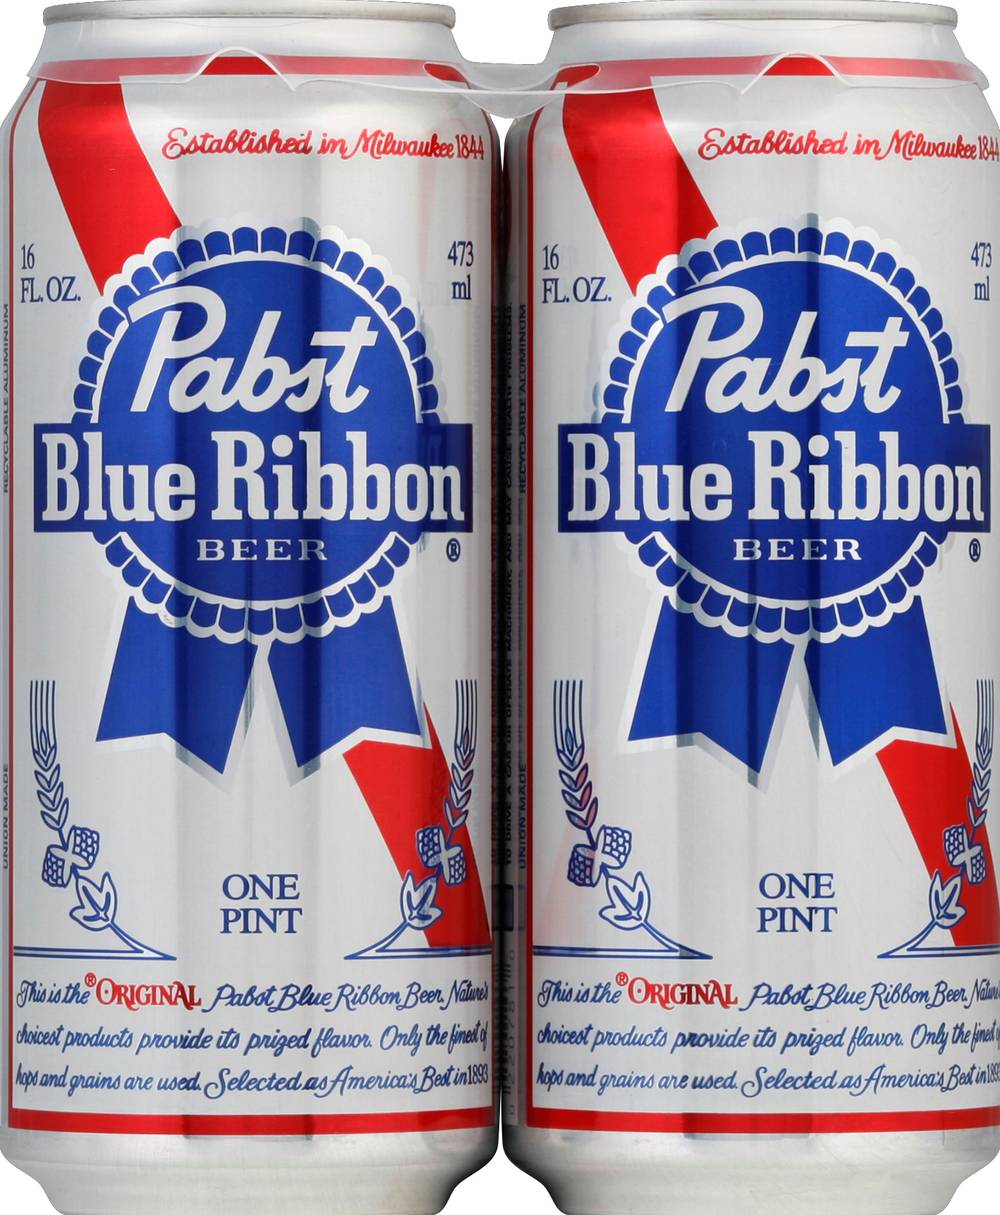 Pabst Blue Ribbon American Lager Beer (4 ct, 16 fl oz)